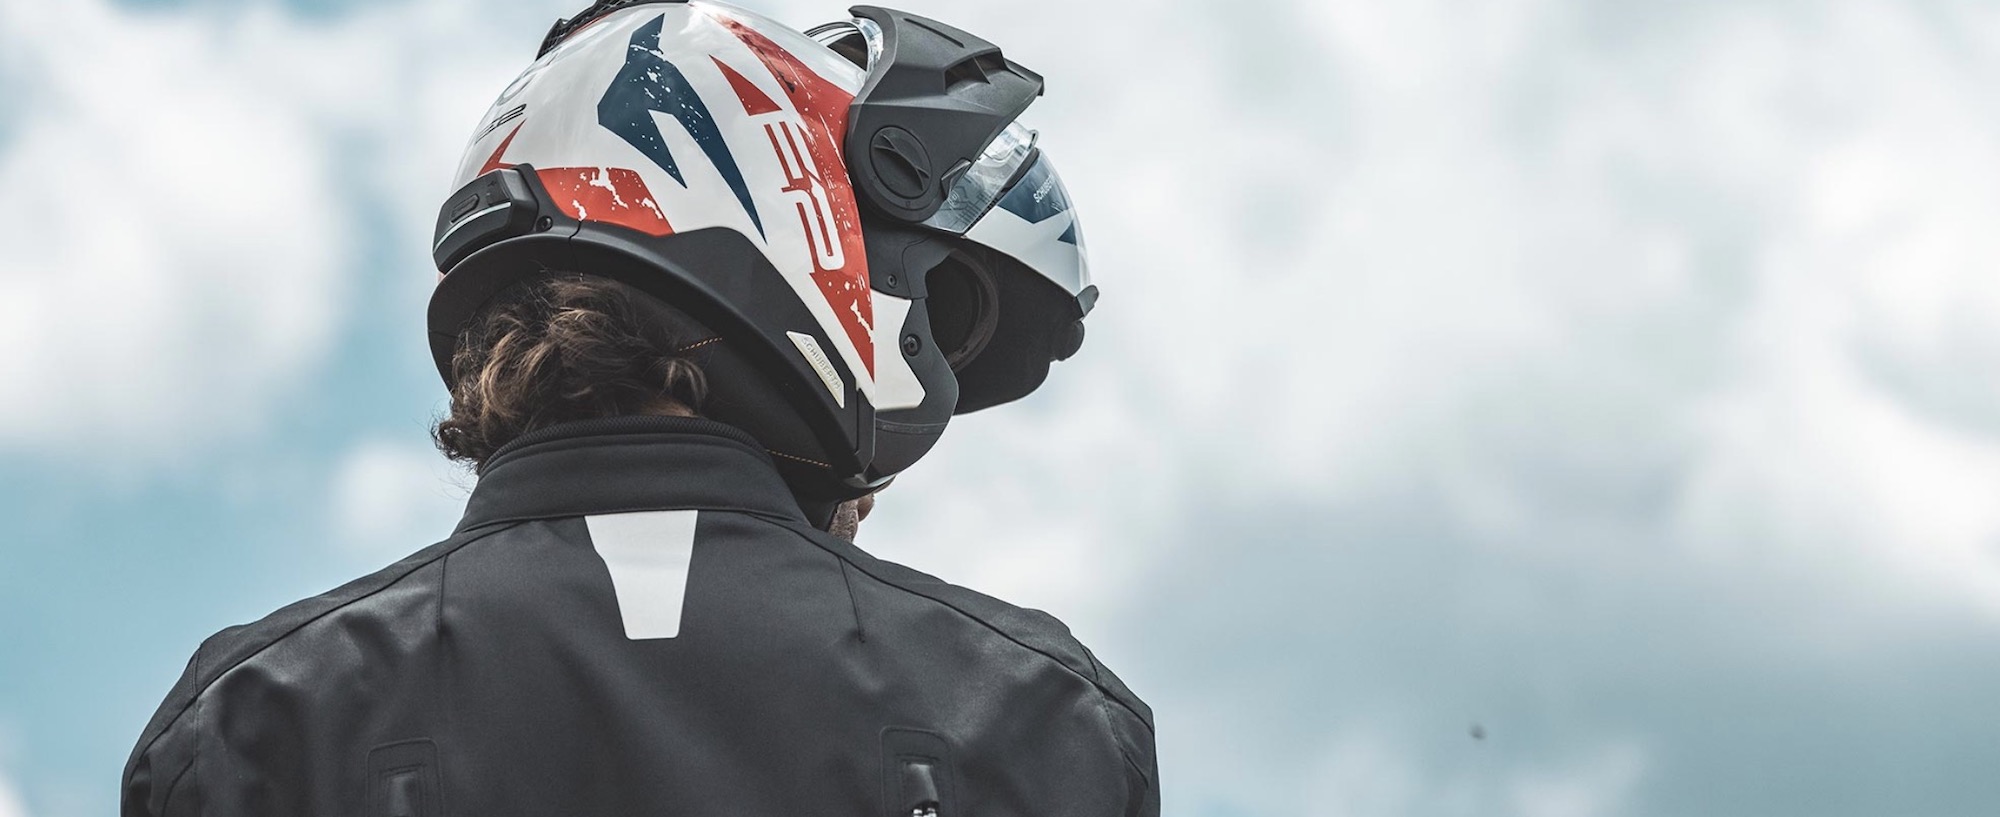 Schuberth's all-new E2 motorcycle helmet. Media sourced from Schuberth's website.